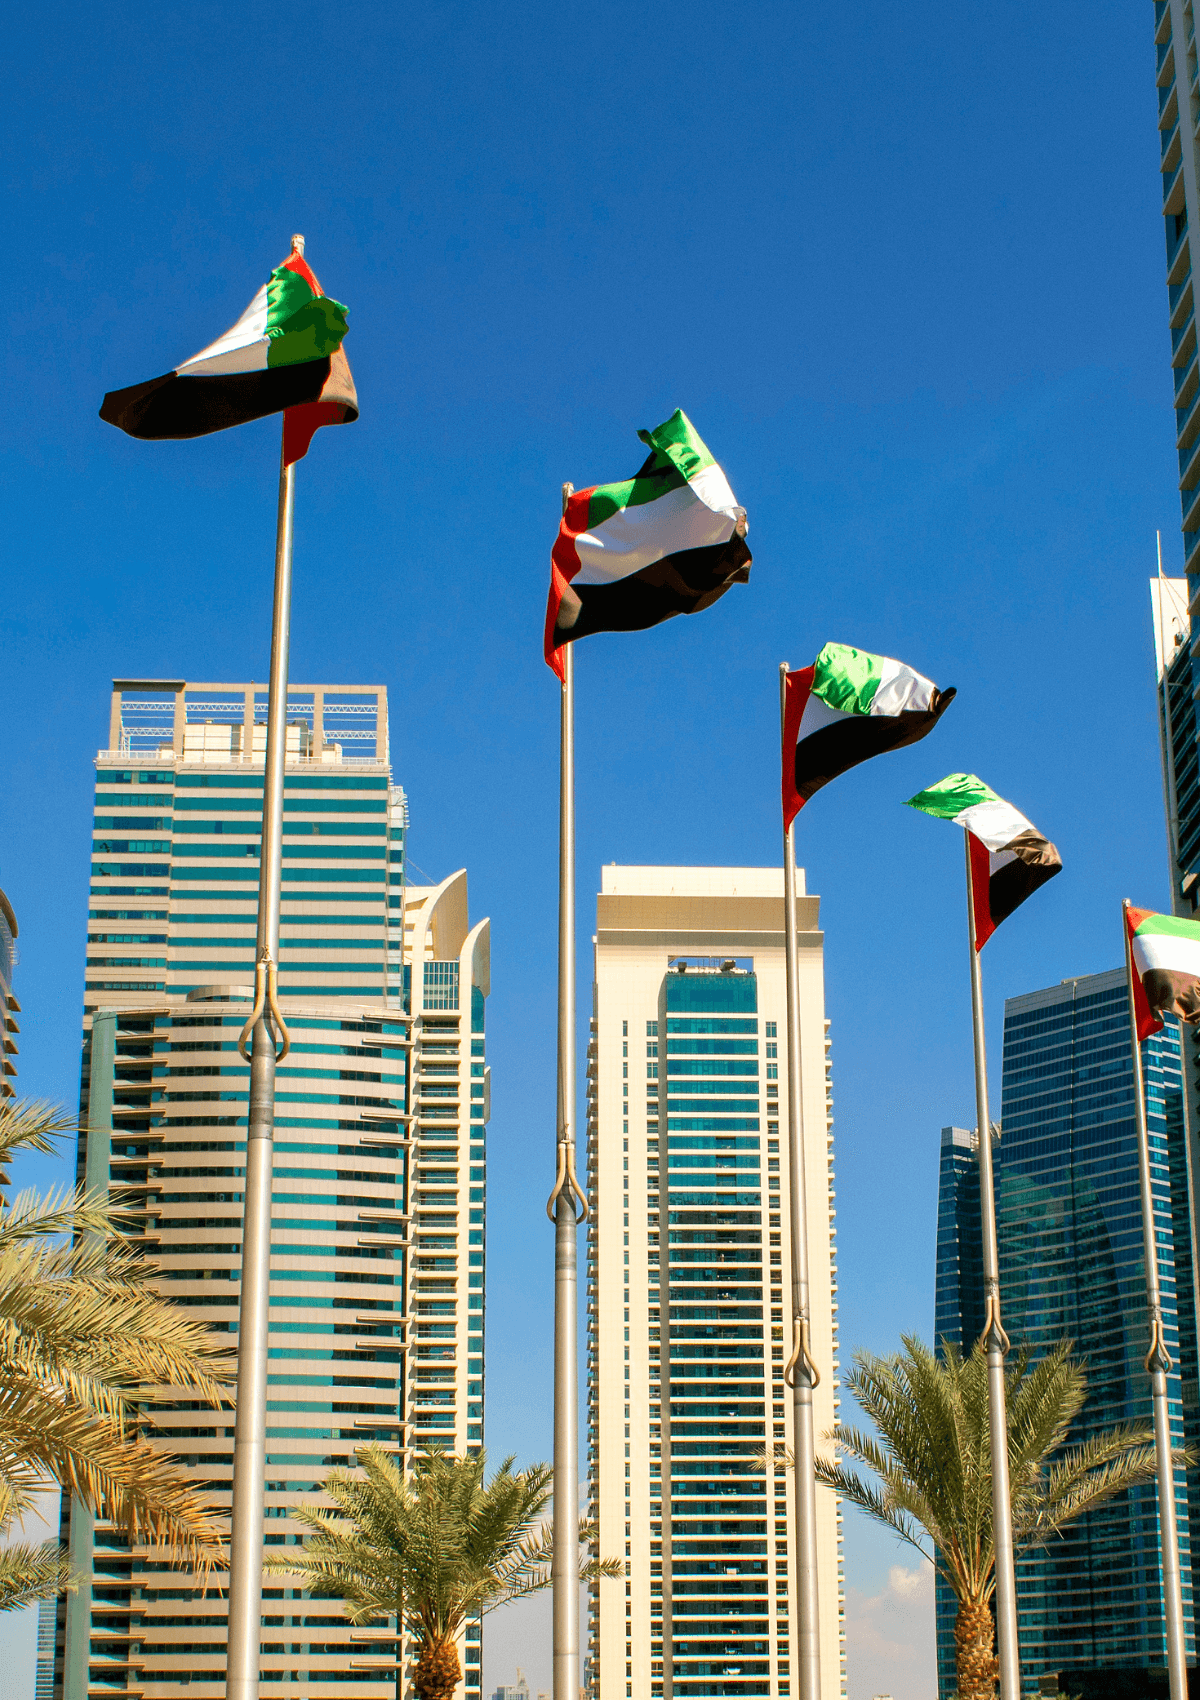 UAE National Day is one of the biggest celebrations in Dubai